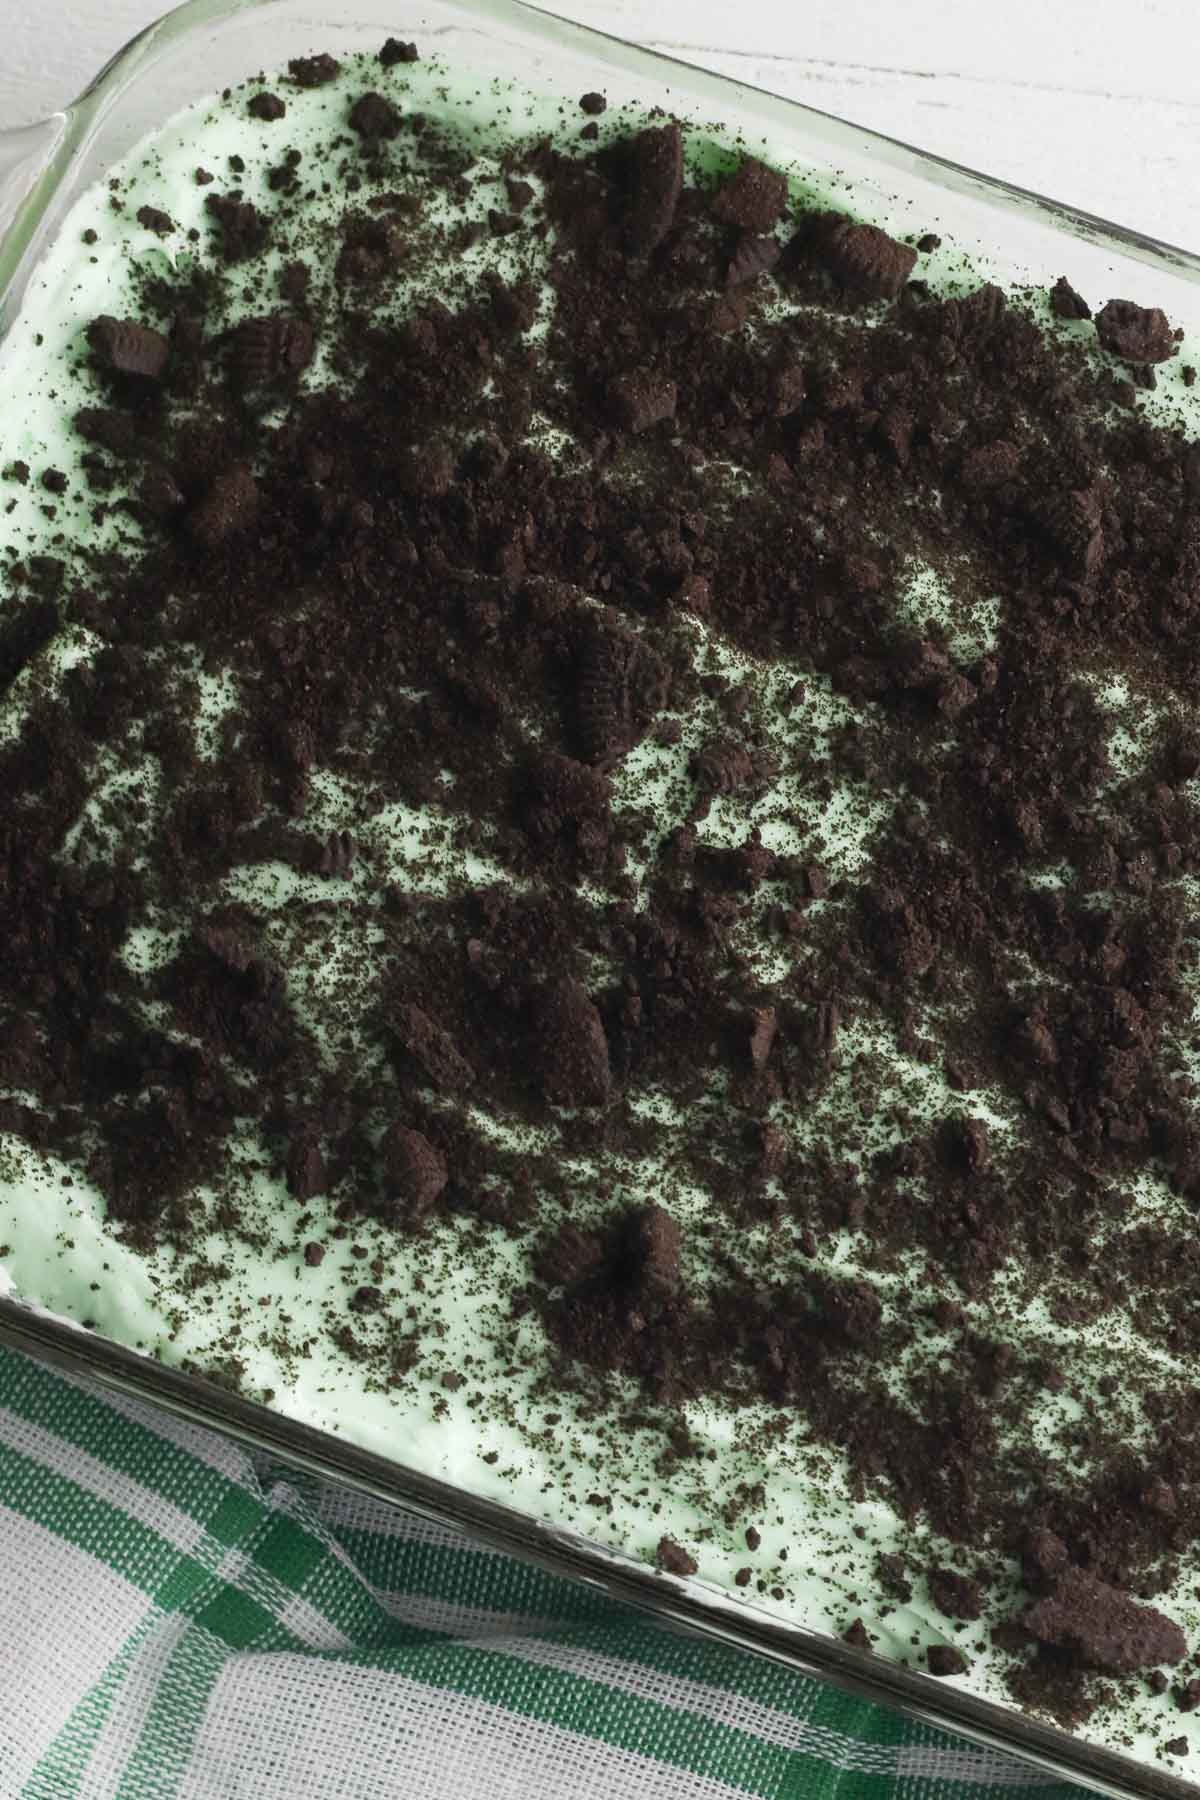 grasshopper brownie recipe with green creamy layer topped with cookie crumbs in a 9x13 glass dish.